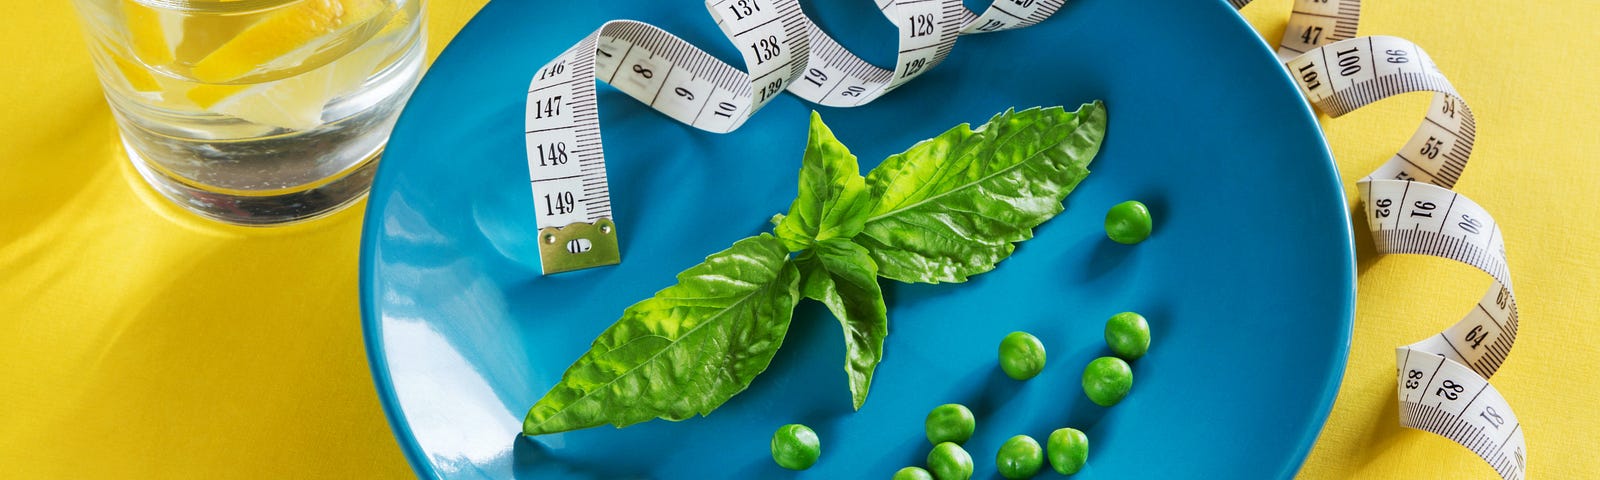 Plate with a fork and tape measure showing just a basil leaf and 12 peas.